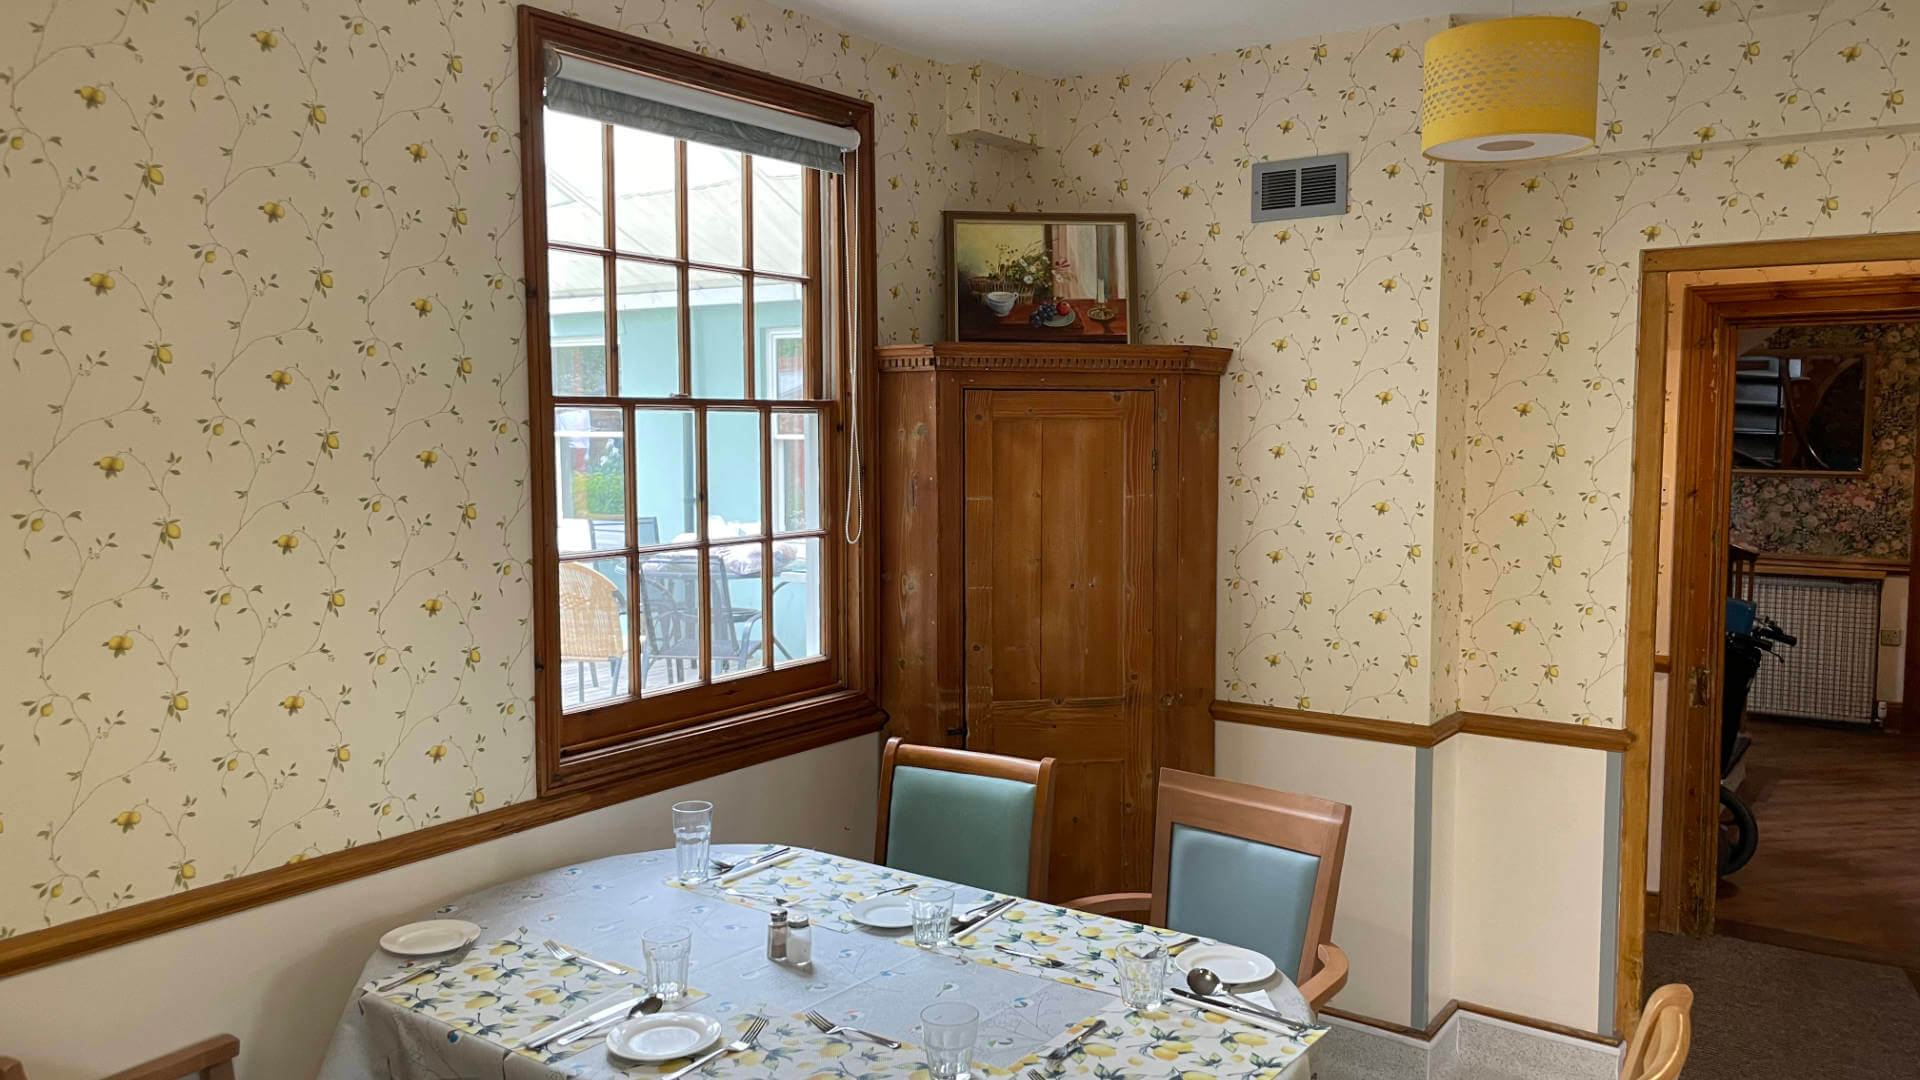 Care home dinning table